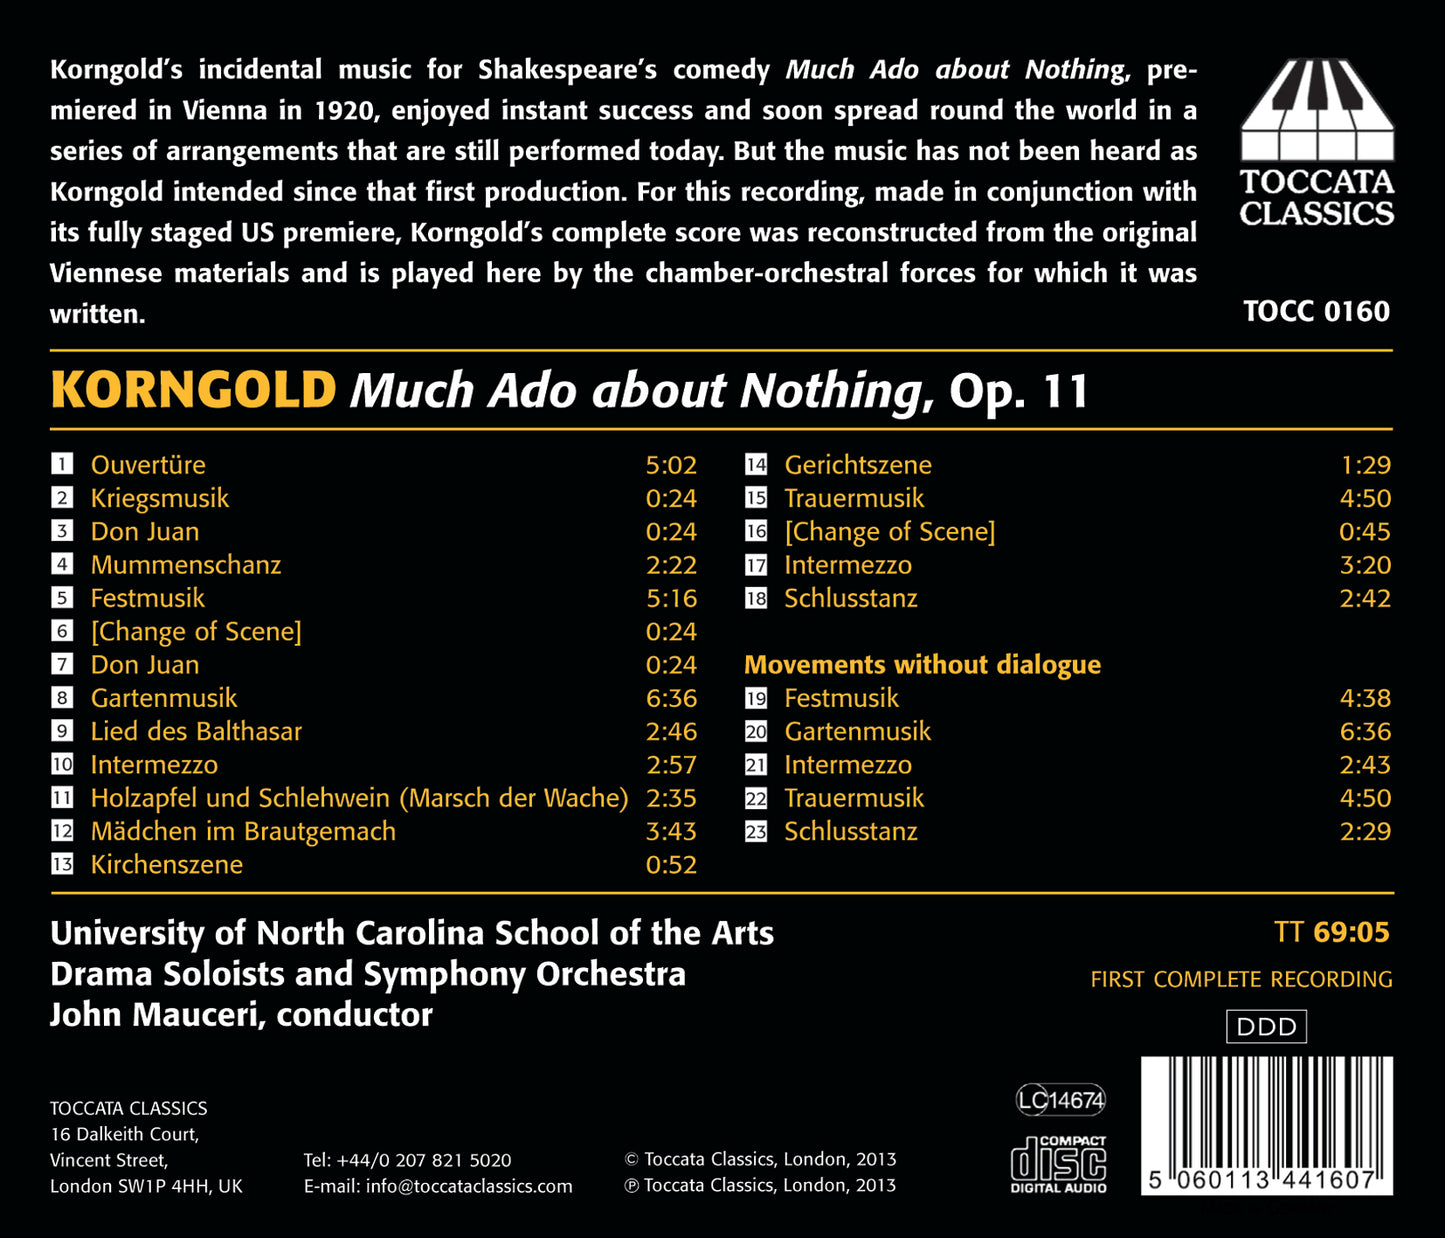 Korngold: Much Ado About Nothing, Op. 11  University Of North Carolina, School Of The Arts, Drama Soloists And Symphony Orchestra, Mauceri